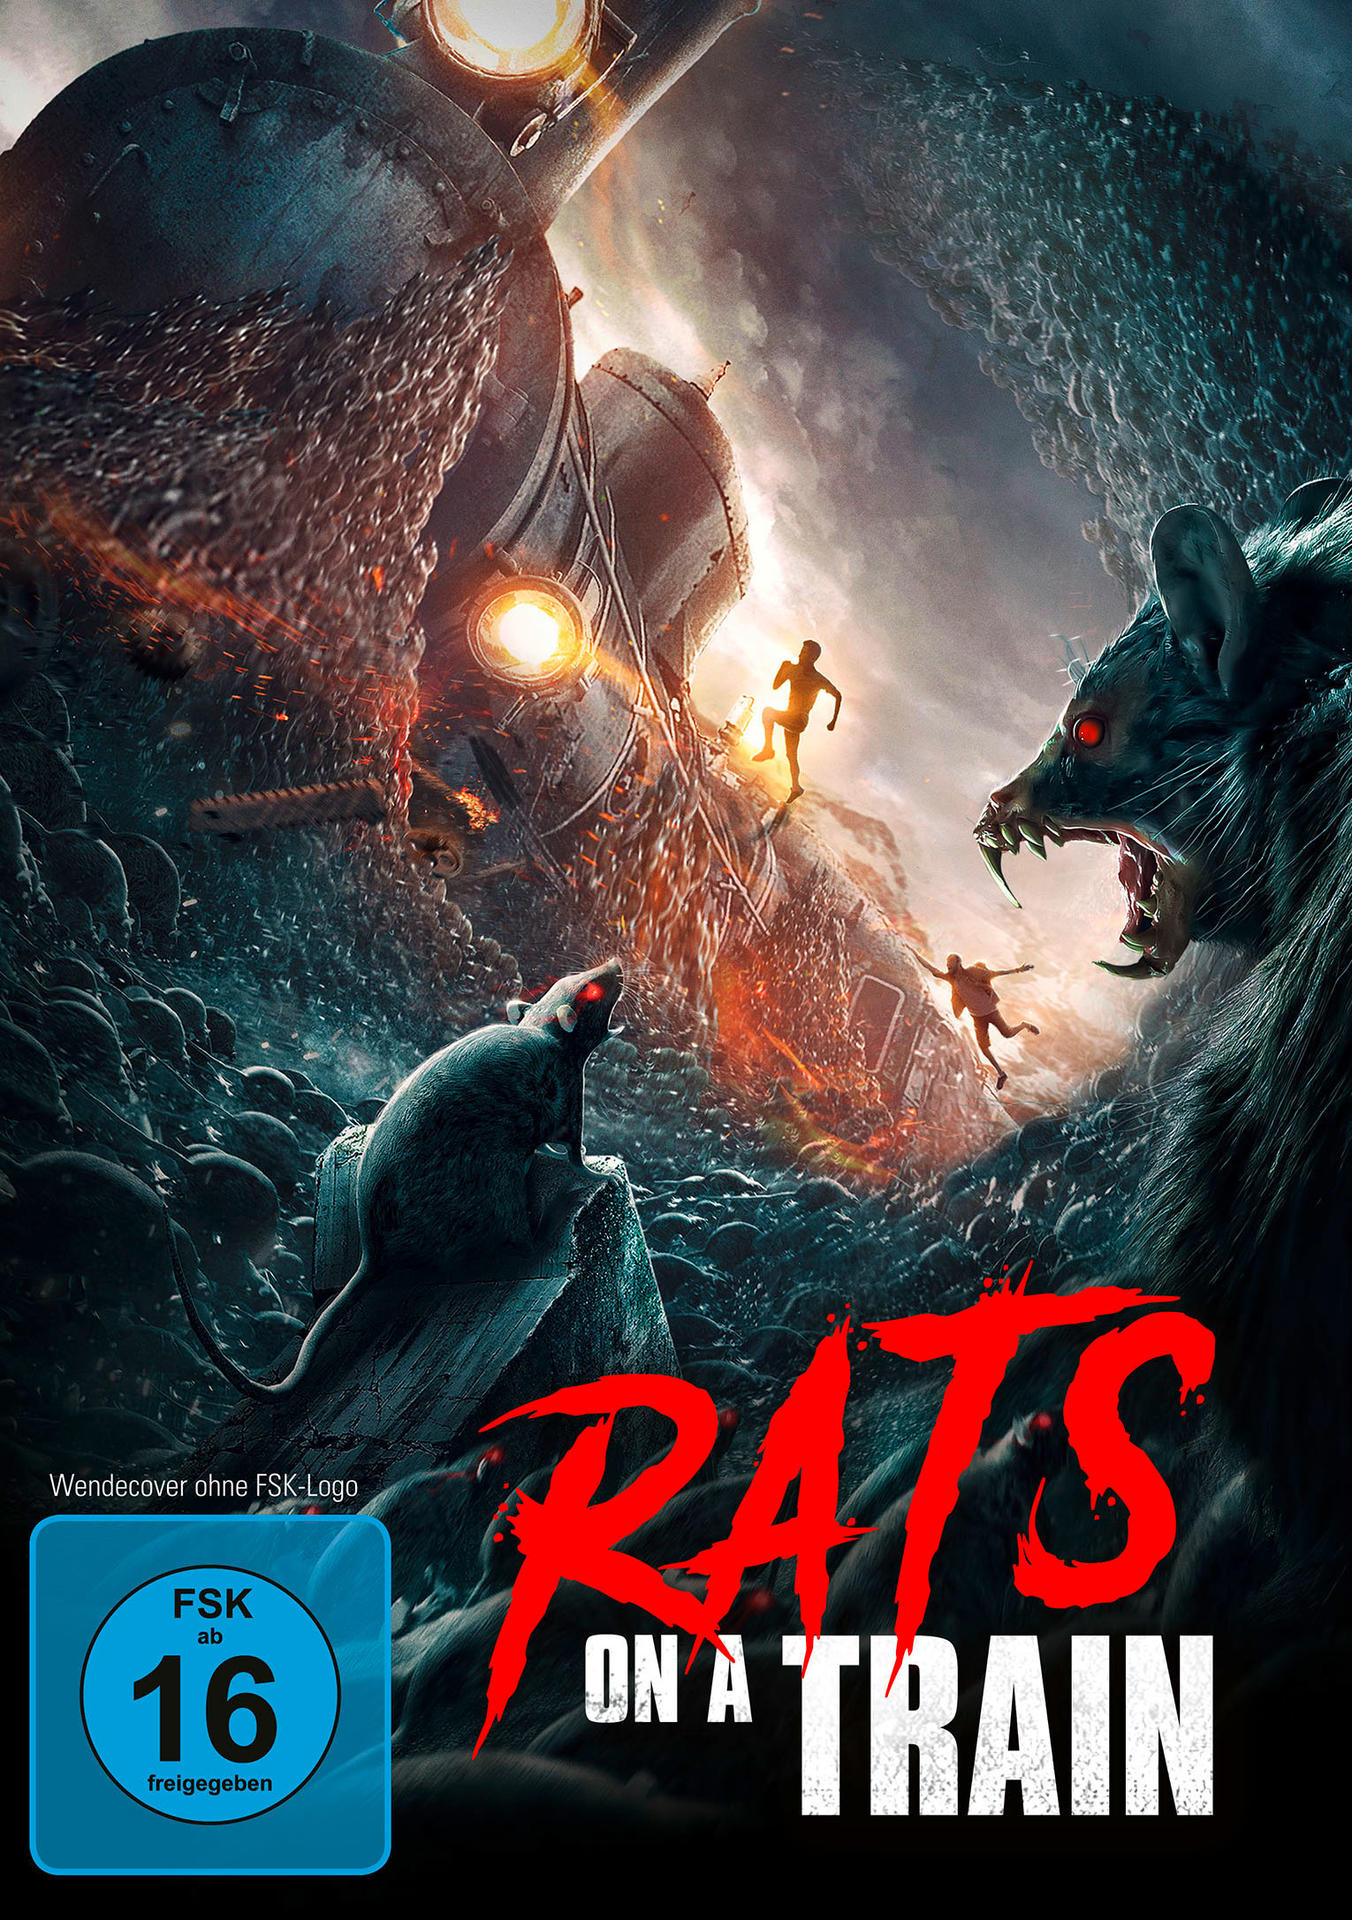 DVD Train Rats A On